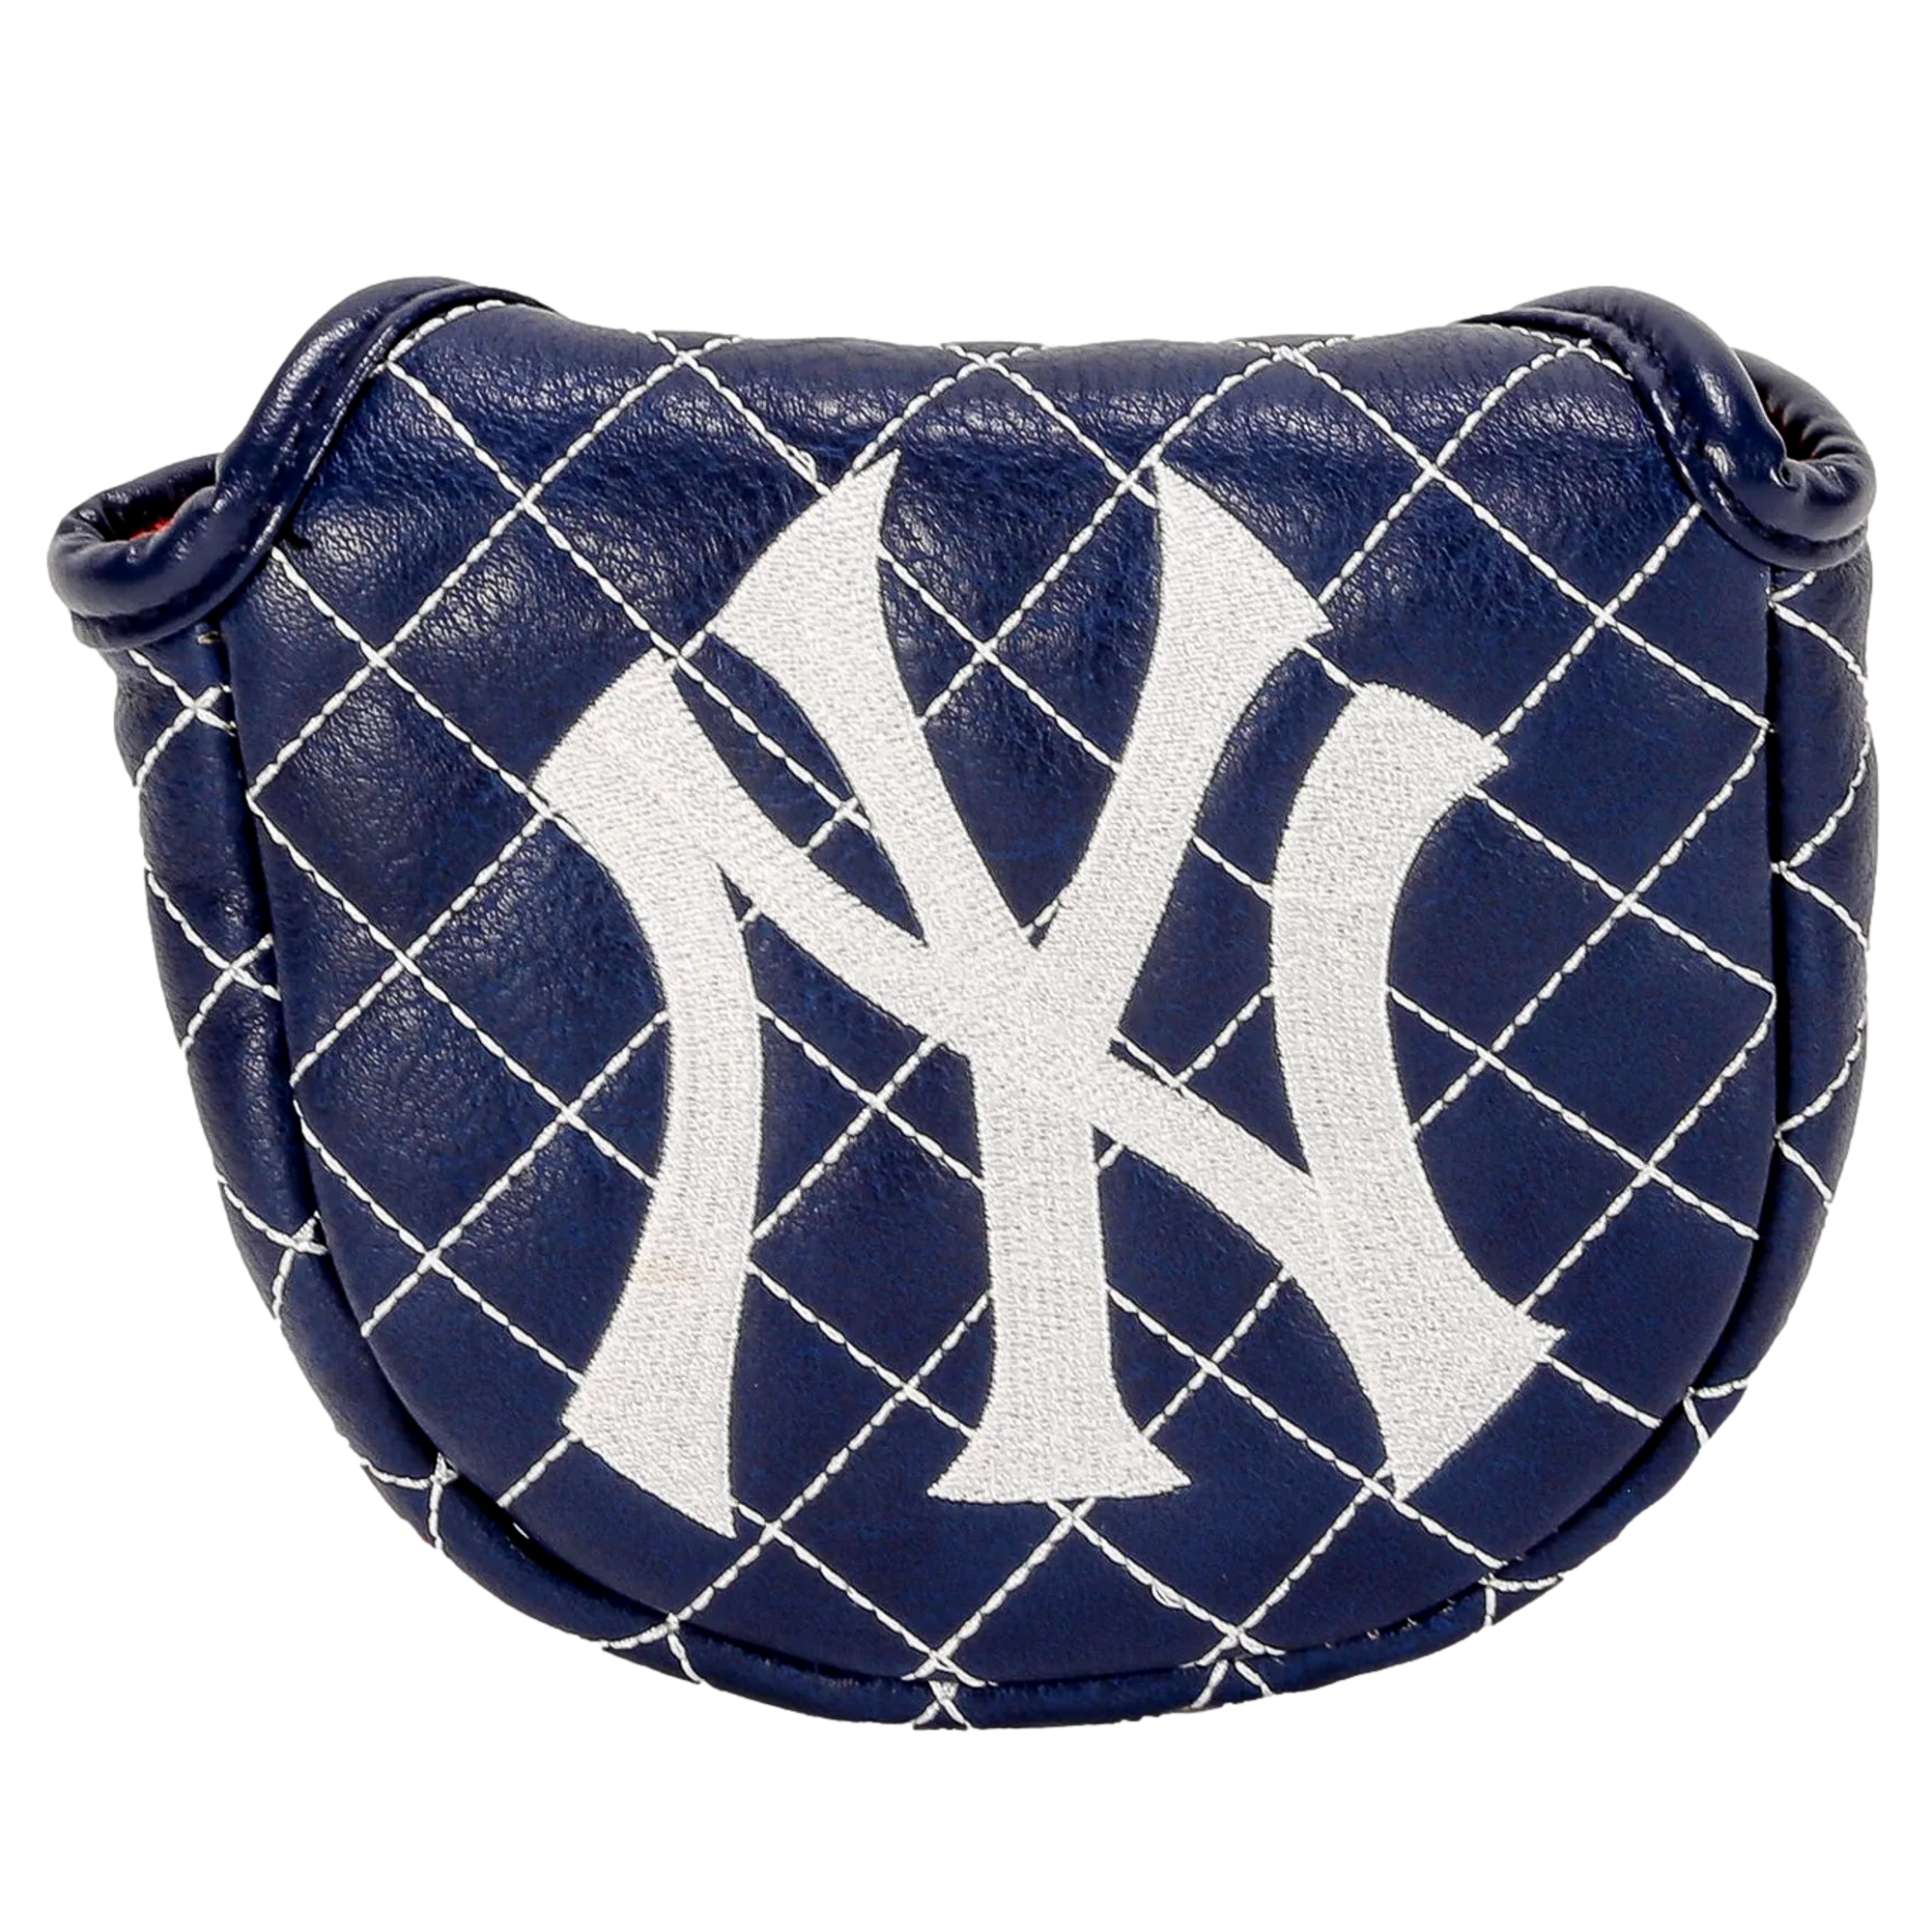 New York Yankees Mallet Putter Cover